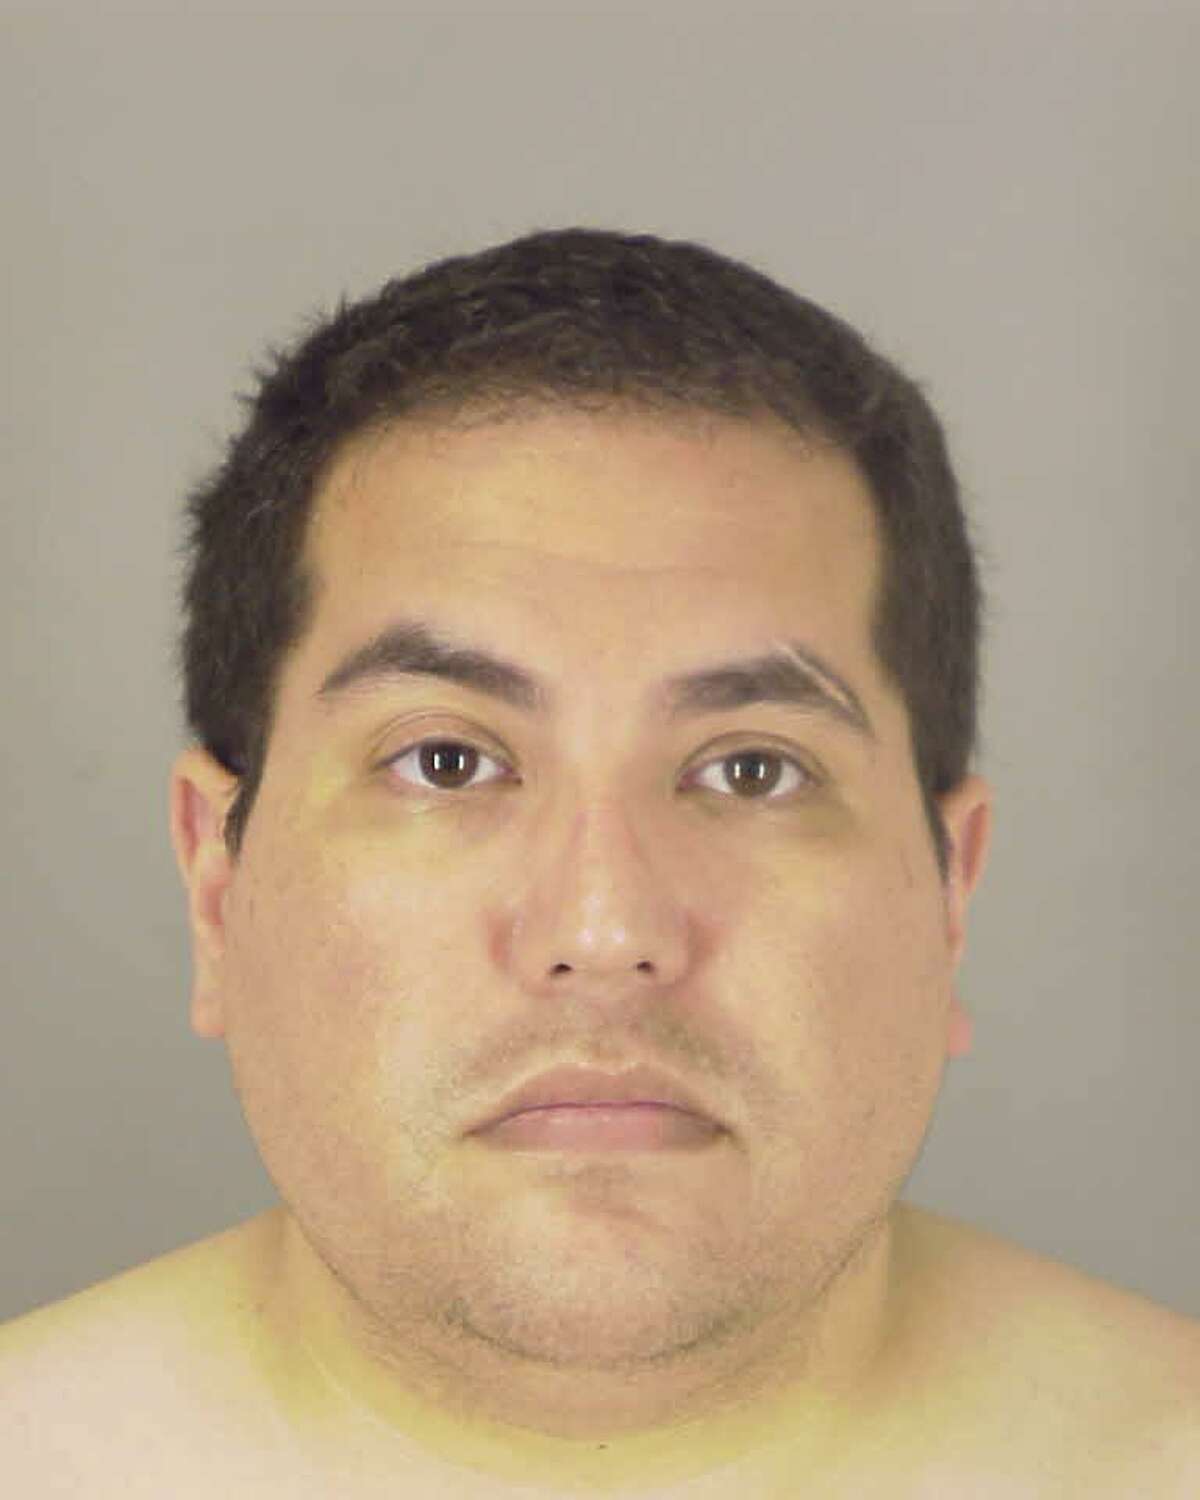 Jonathan Torres, 40, was arrested on federal charges including use of an explosive device on May 25. He was arrested in Jefferson County in 2015 on drug-related charges. Photo provided by Jefferson County